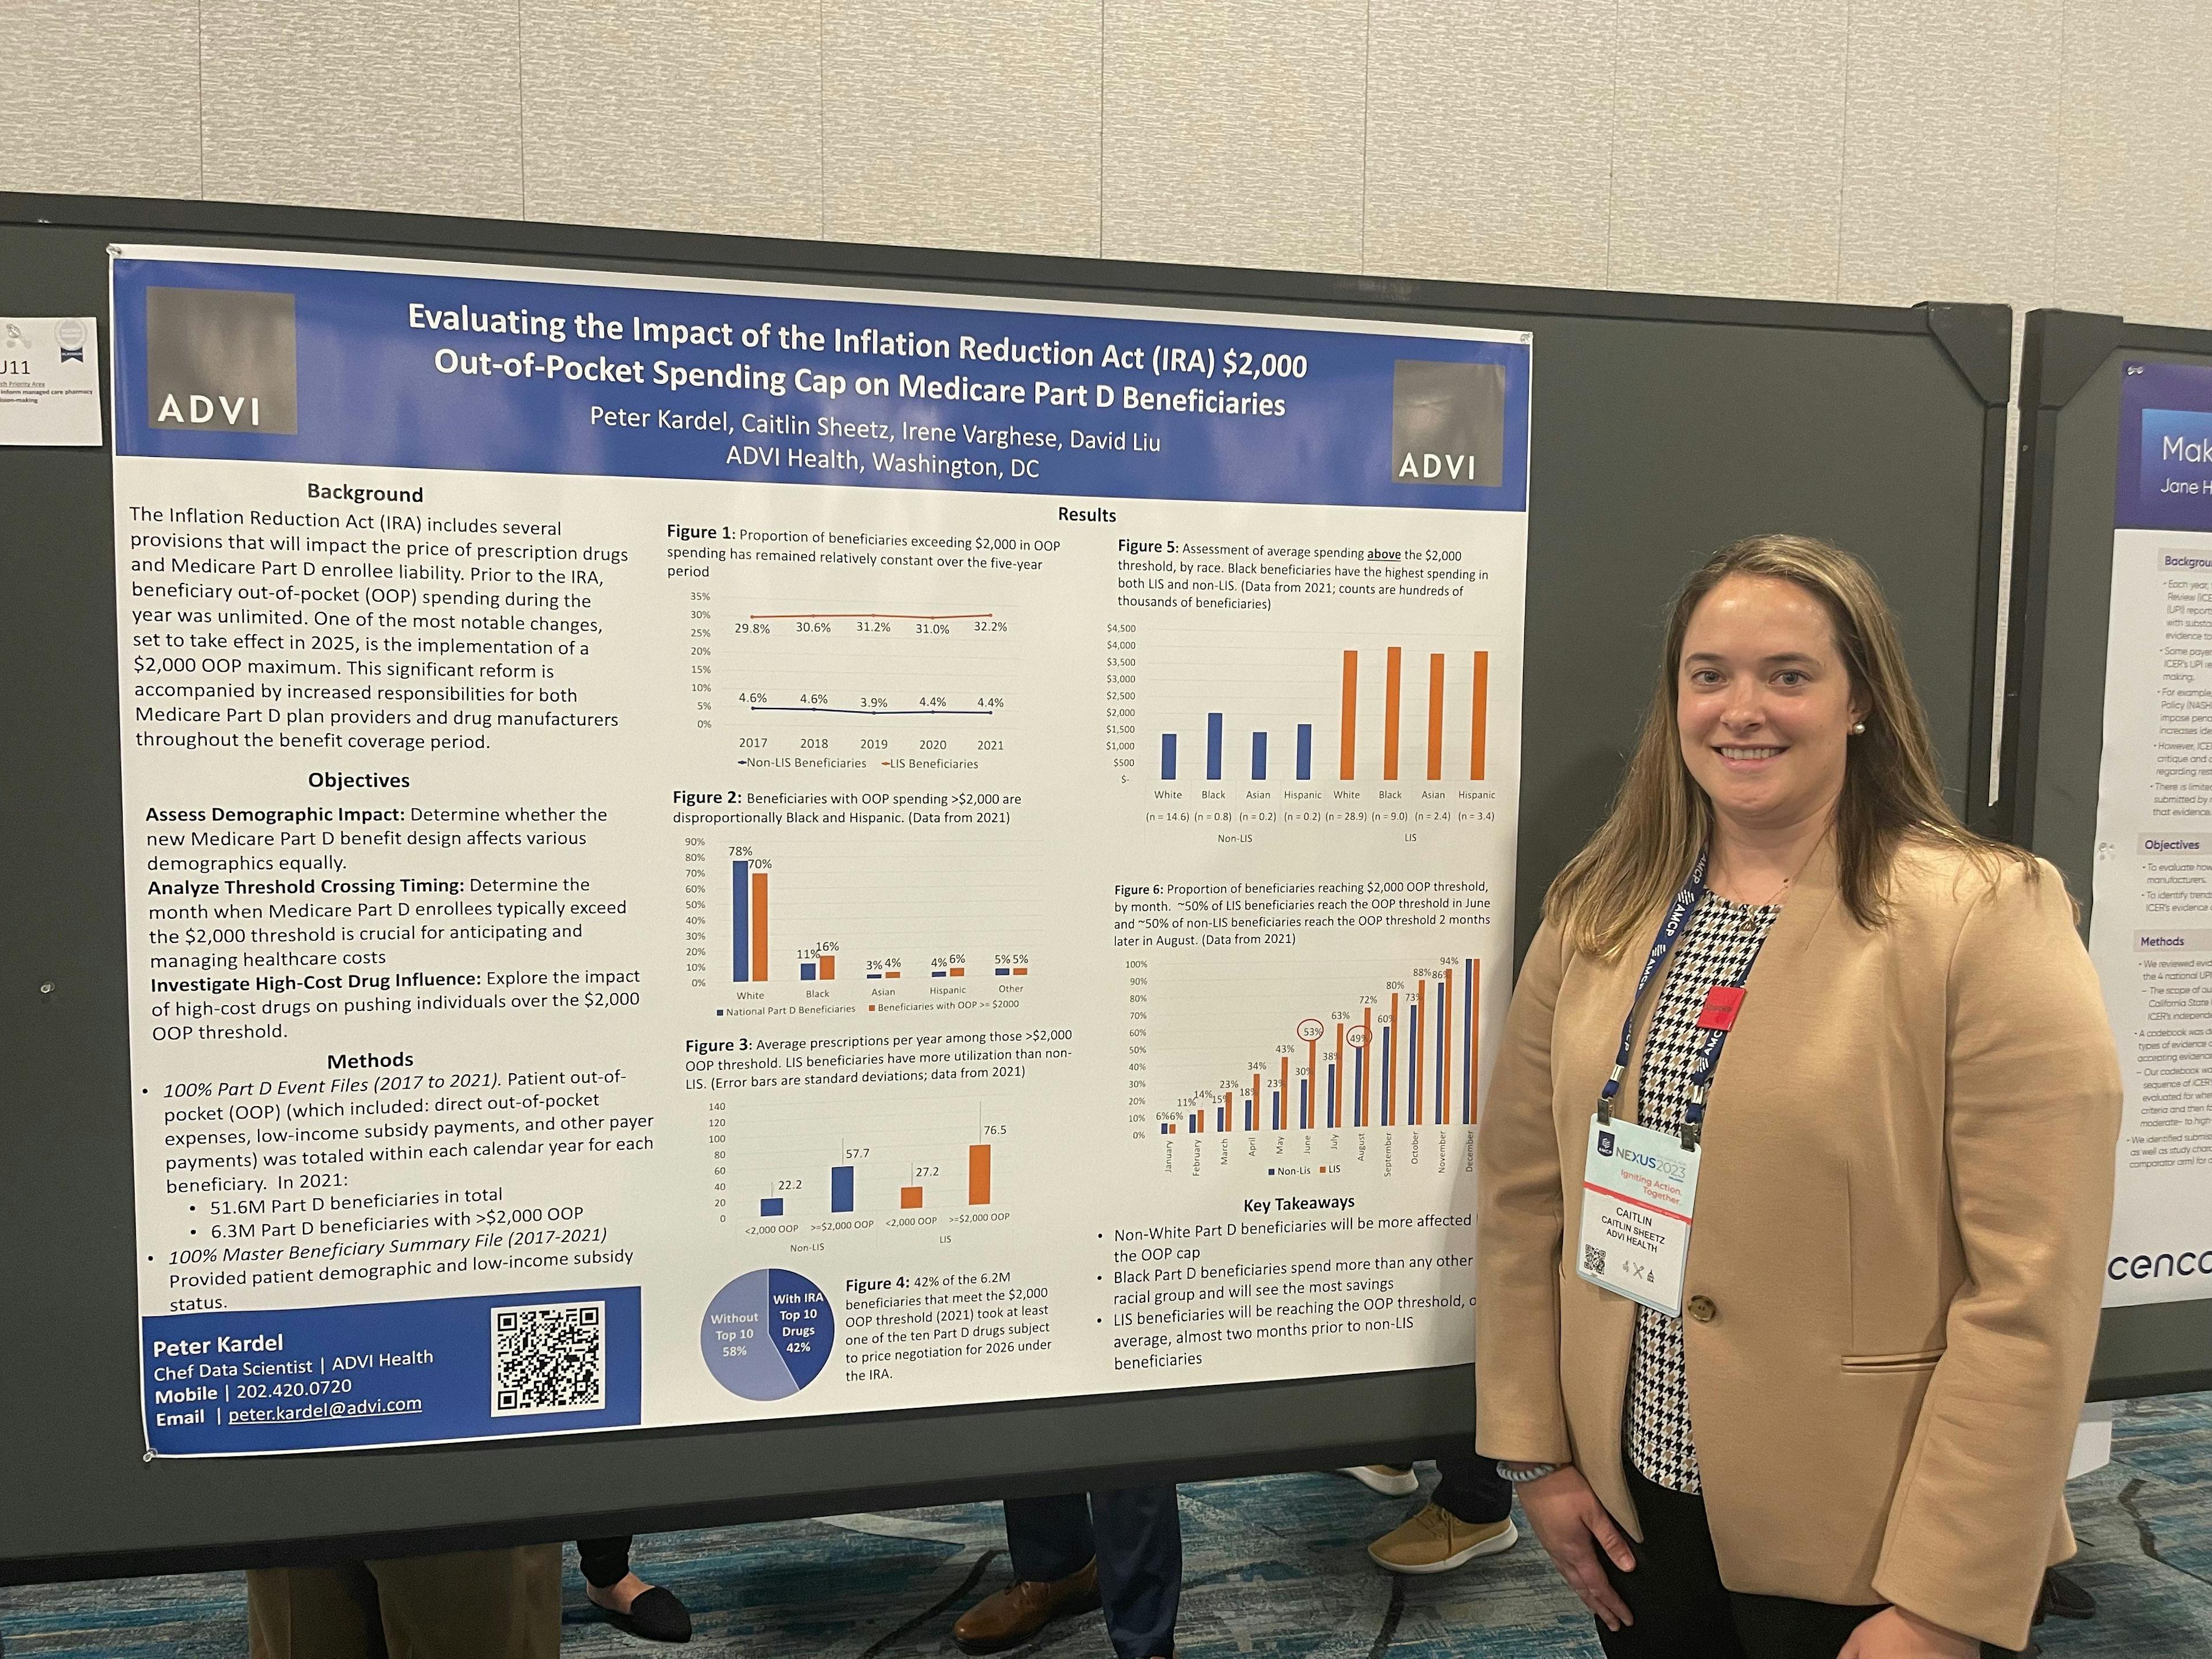 Caitlin Sheetz, vice president and head of analytics at ADVI Health and co-author of the analysis, told MHE that the study sheds light on what's going to happen to this particular patient group most affected by the OOP cap.